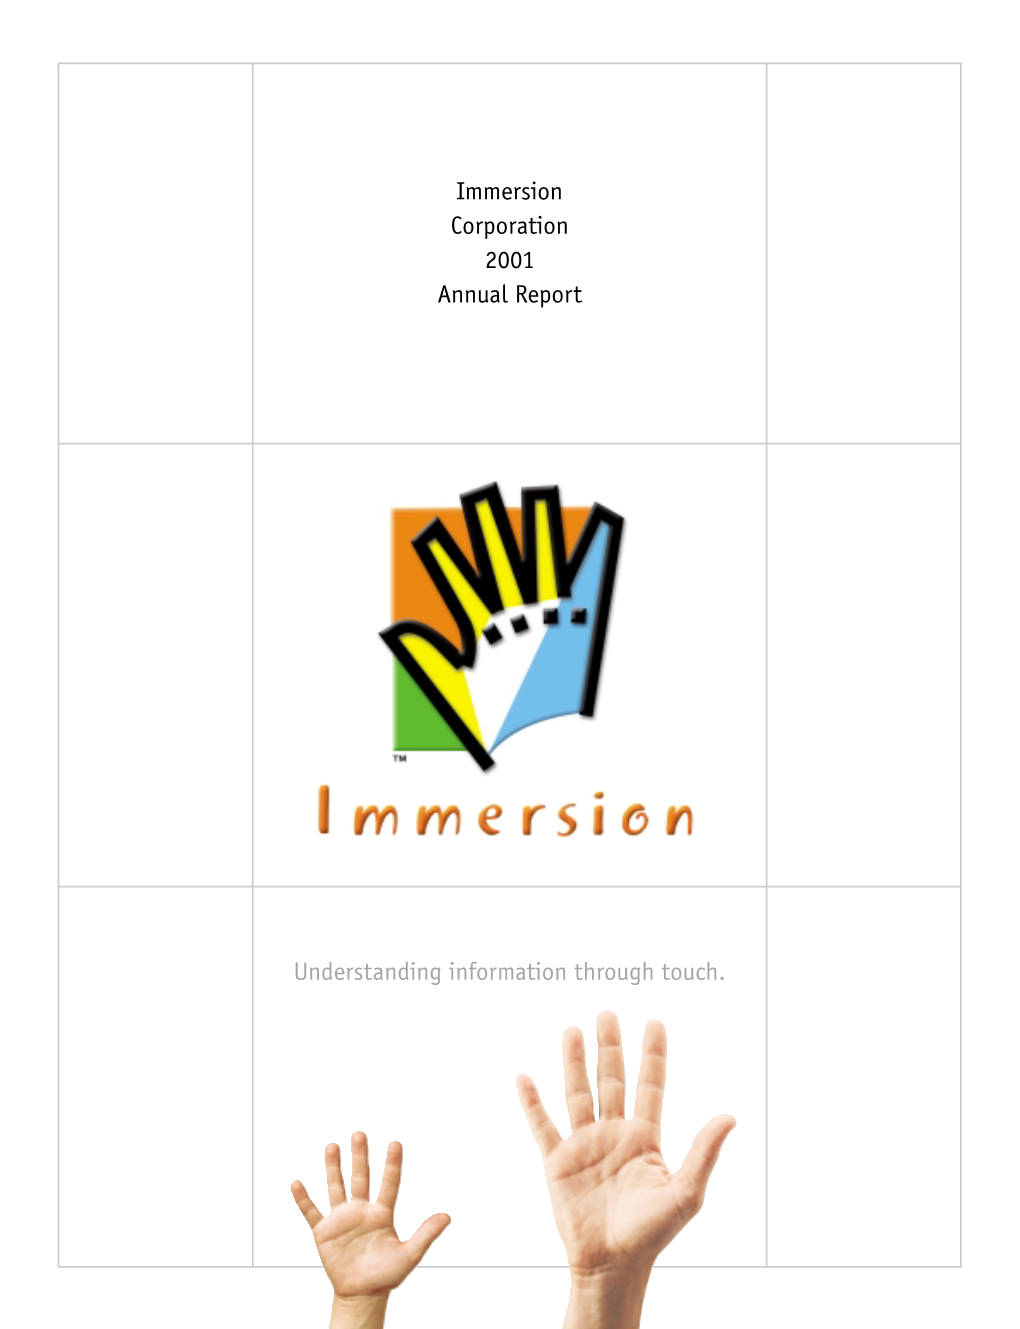 Immersion Corporation 2001 Annual Report Understanding Information